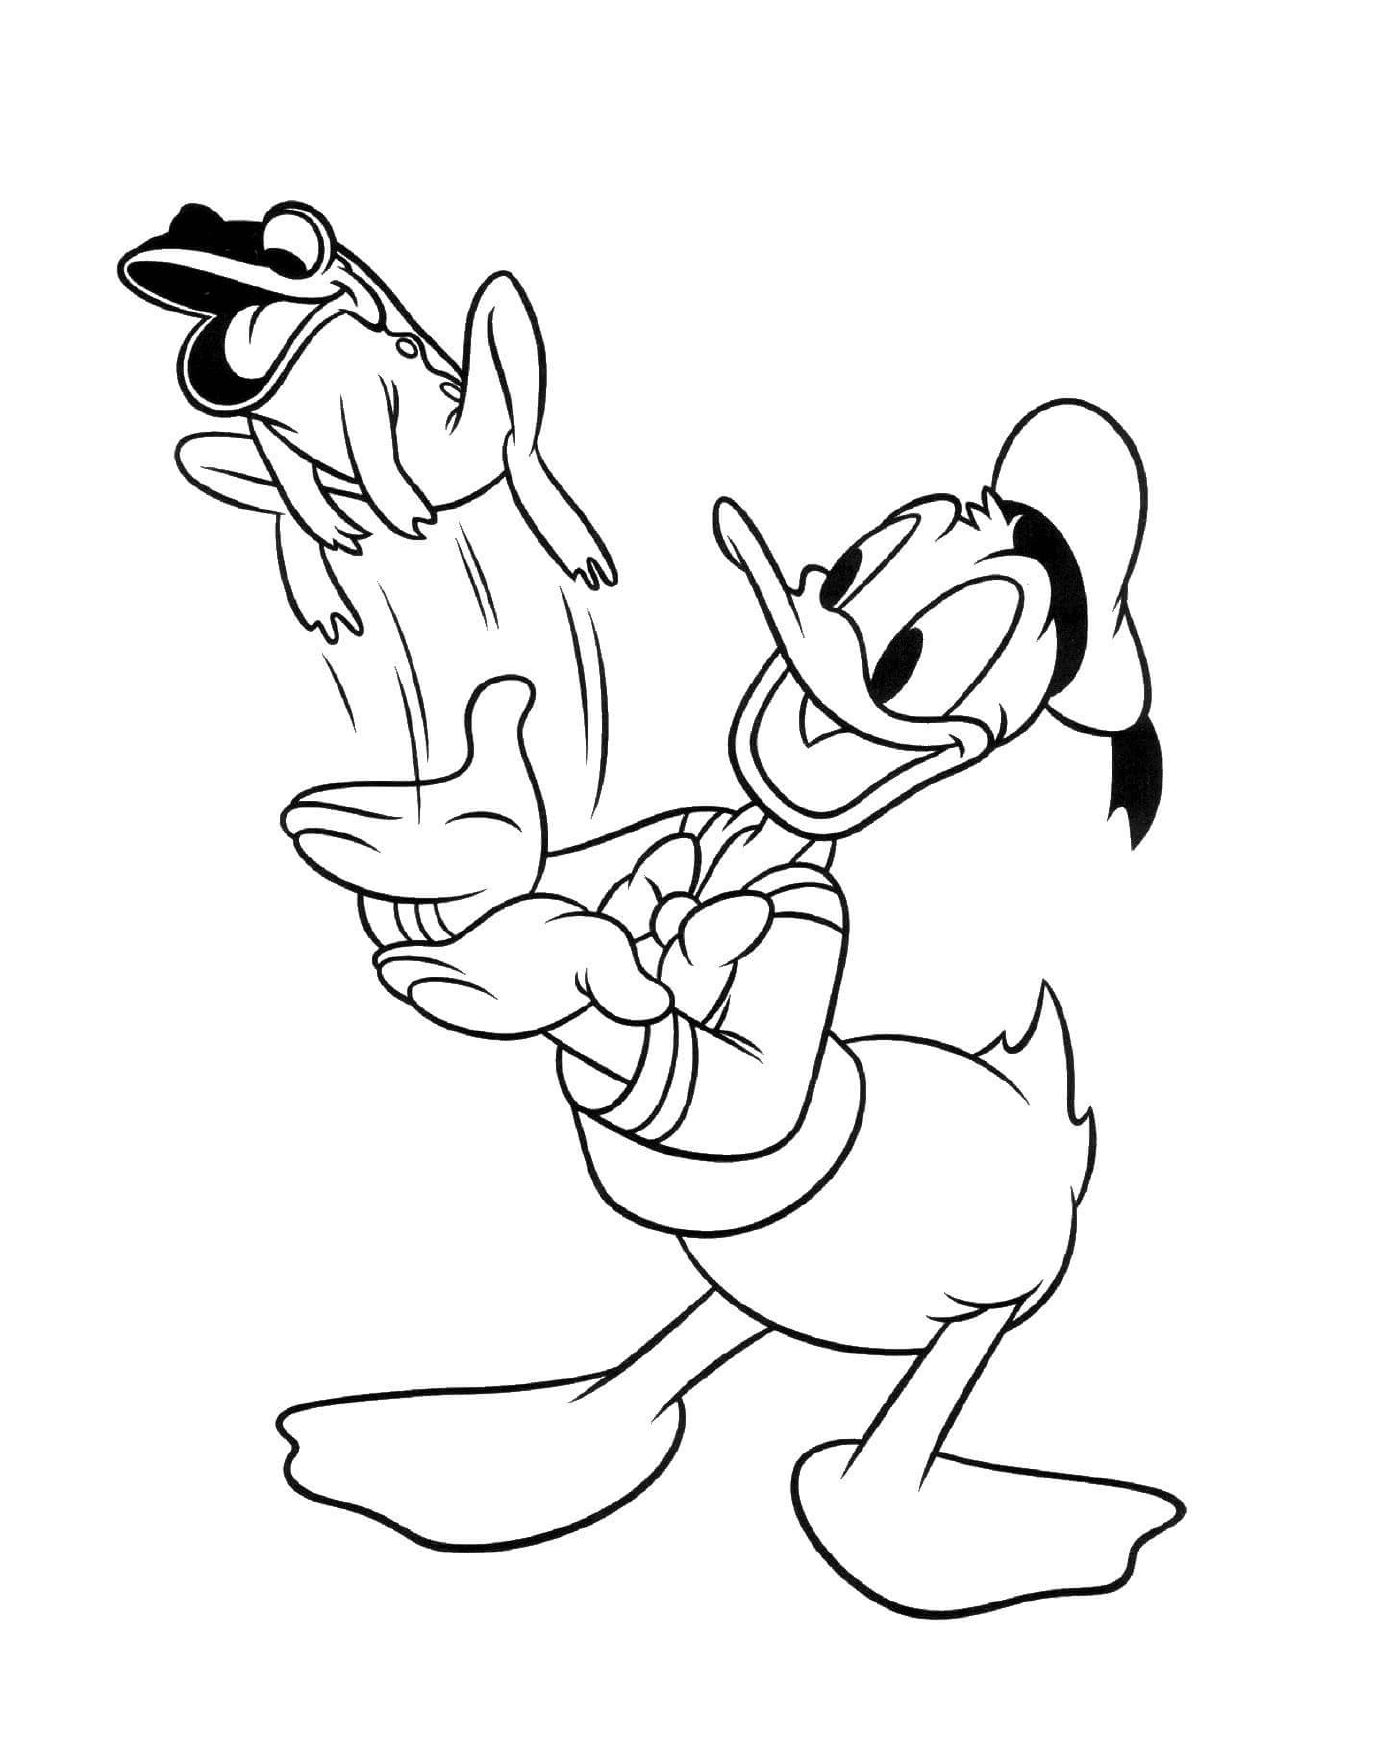  Donald Duck plays with a dog 